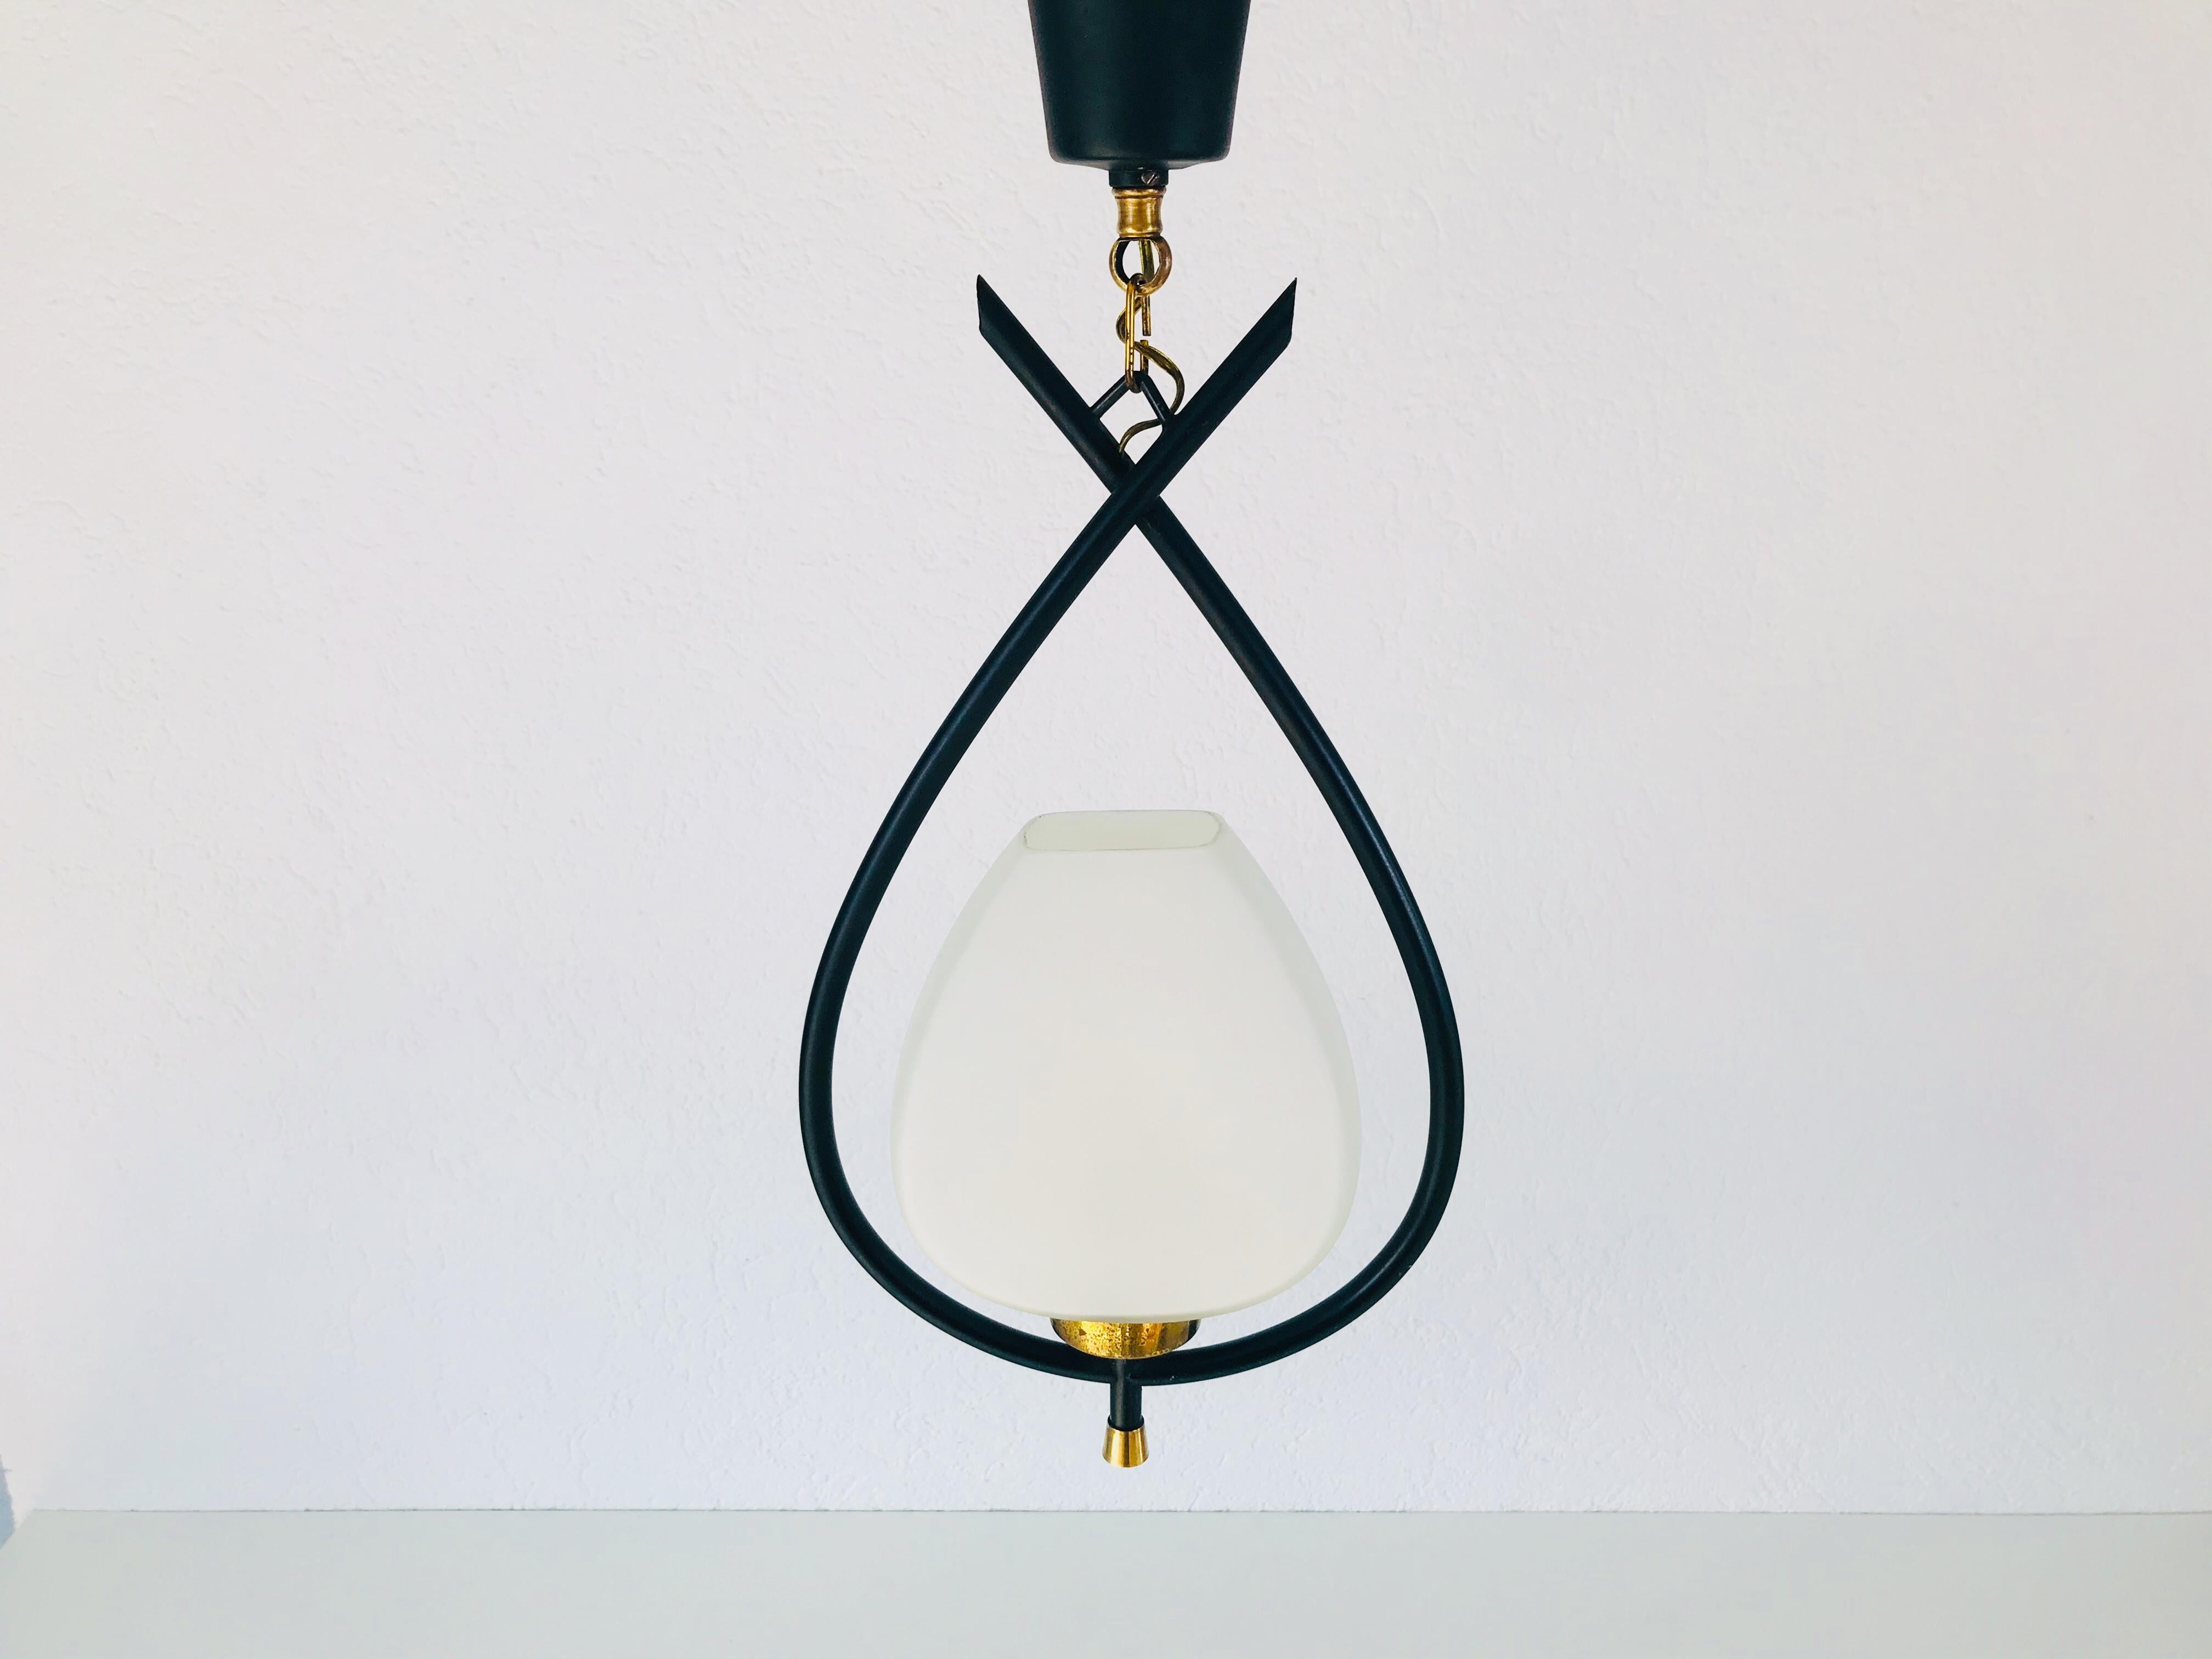 Metal Extraordinary Midcentury Pendant Lamp from Maison Lunel, France, 1950s